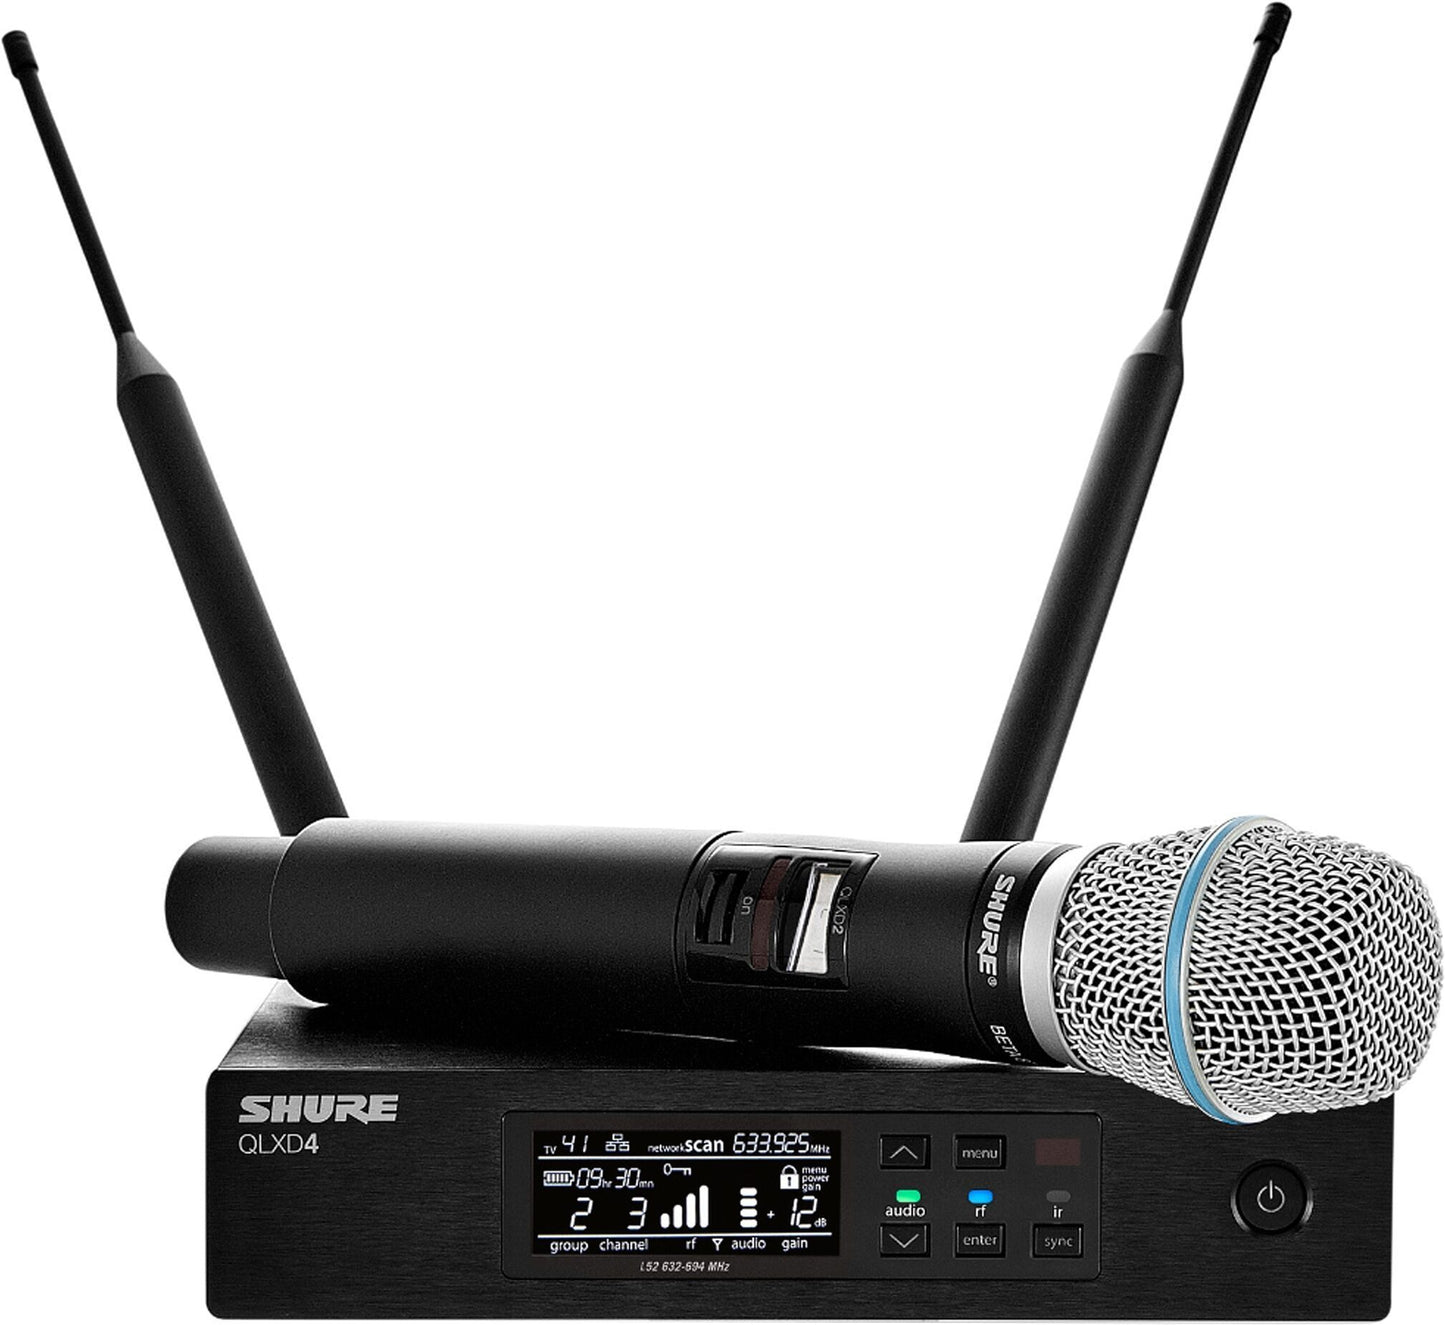 Shure QLXD24/B87A Wireless System with Beta 87a Handheld Microphone Transmitter, Band J50A (572 - 608 MHz)